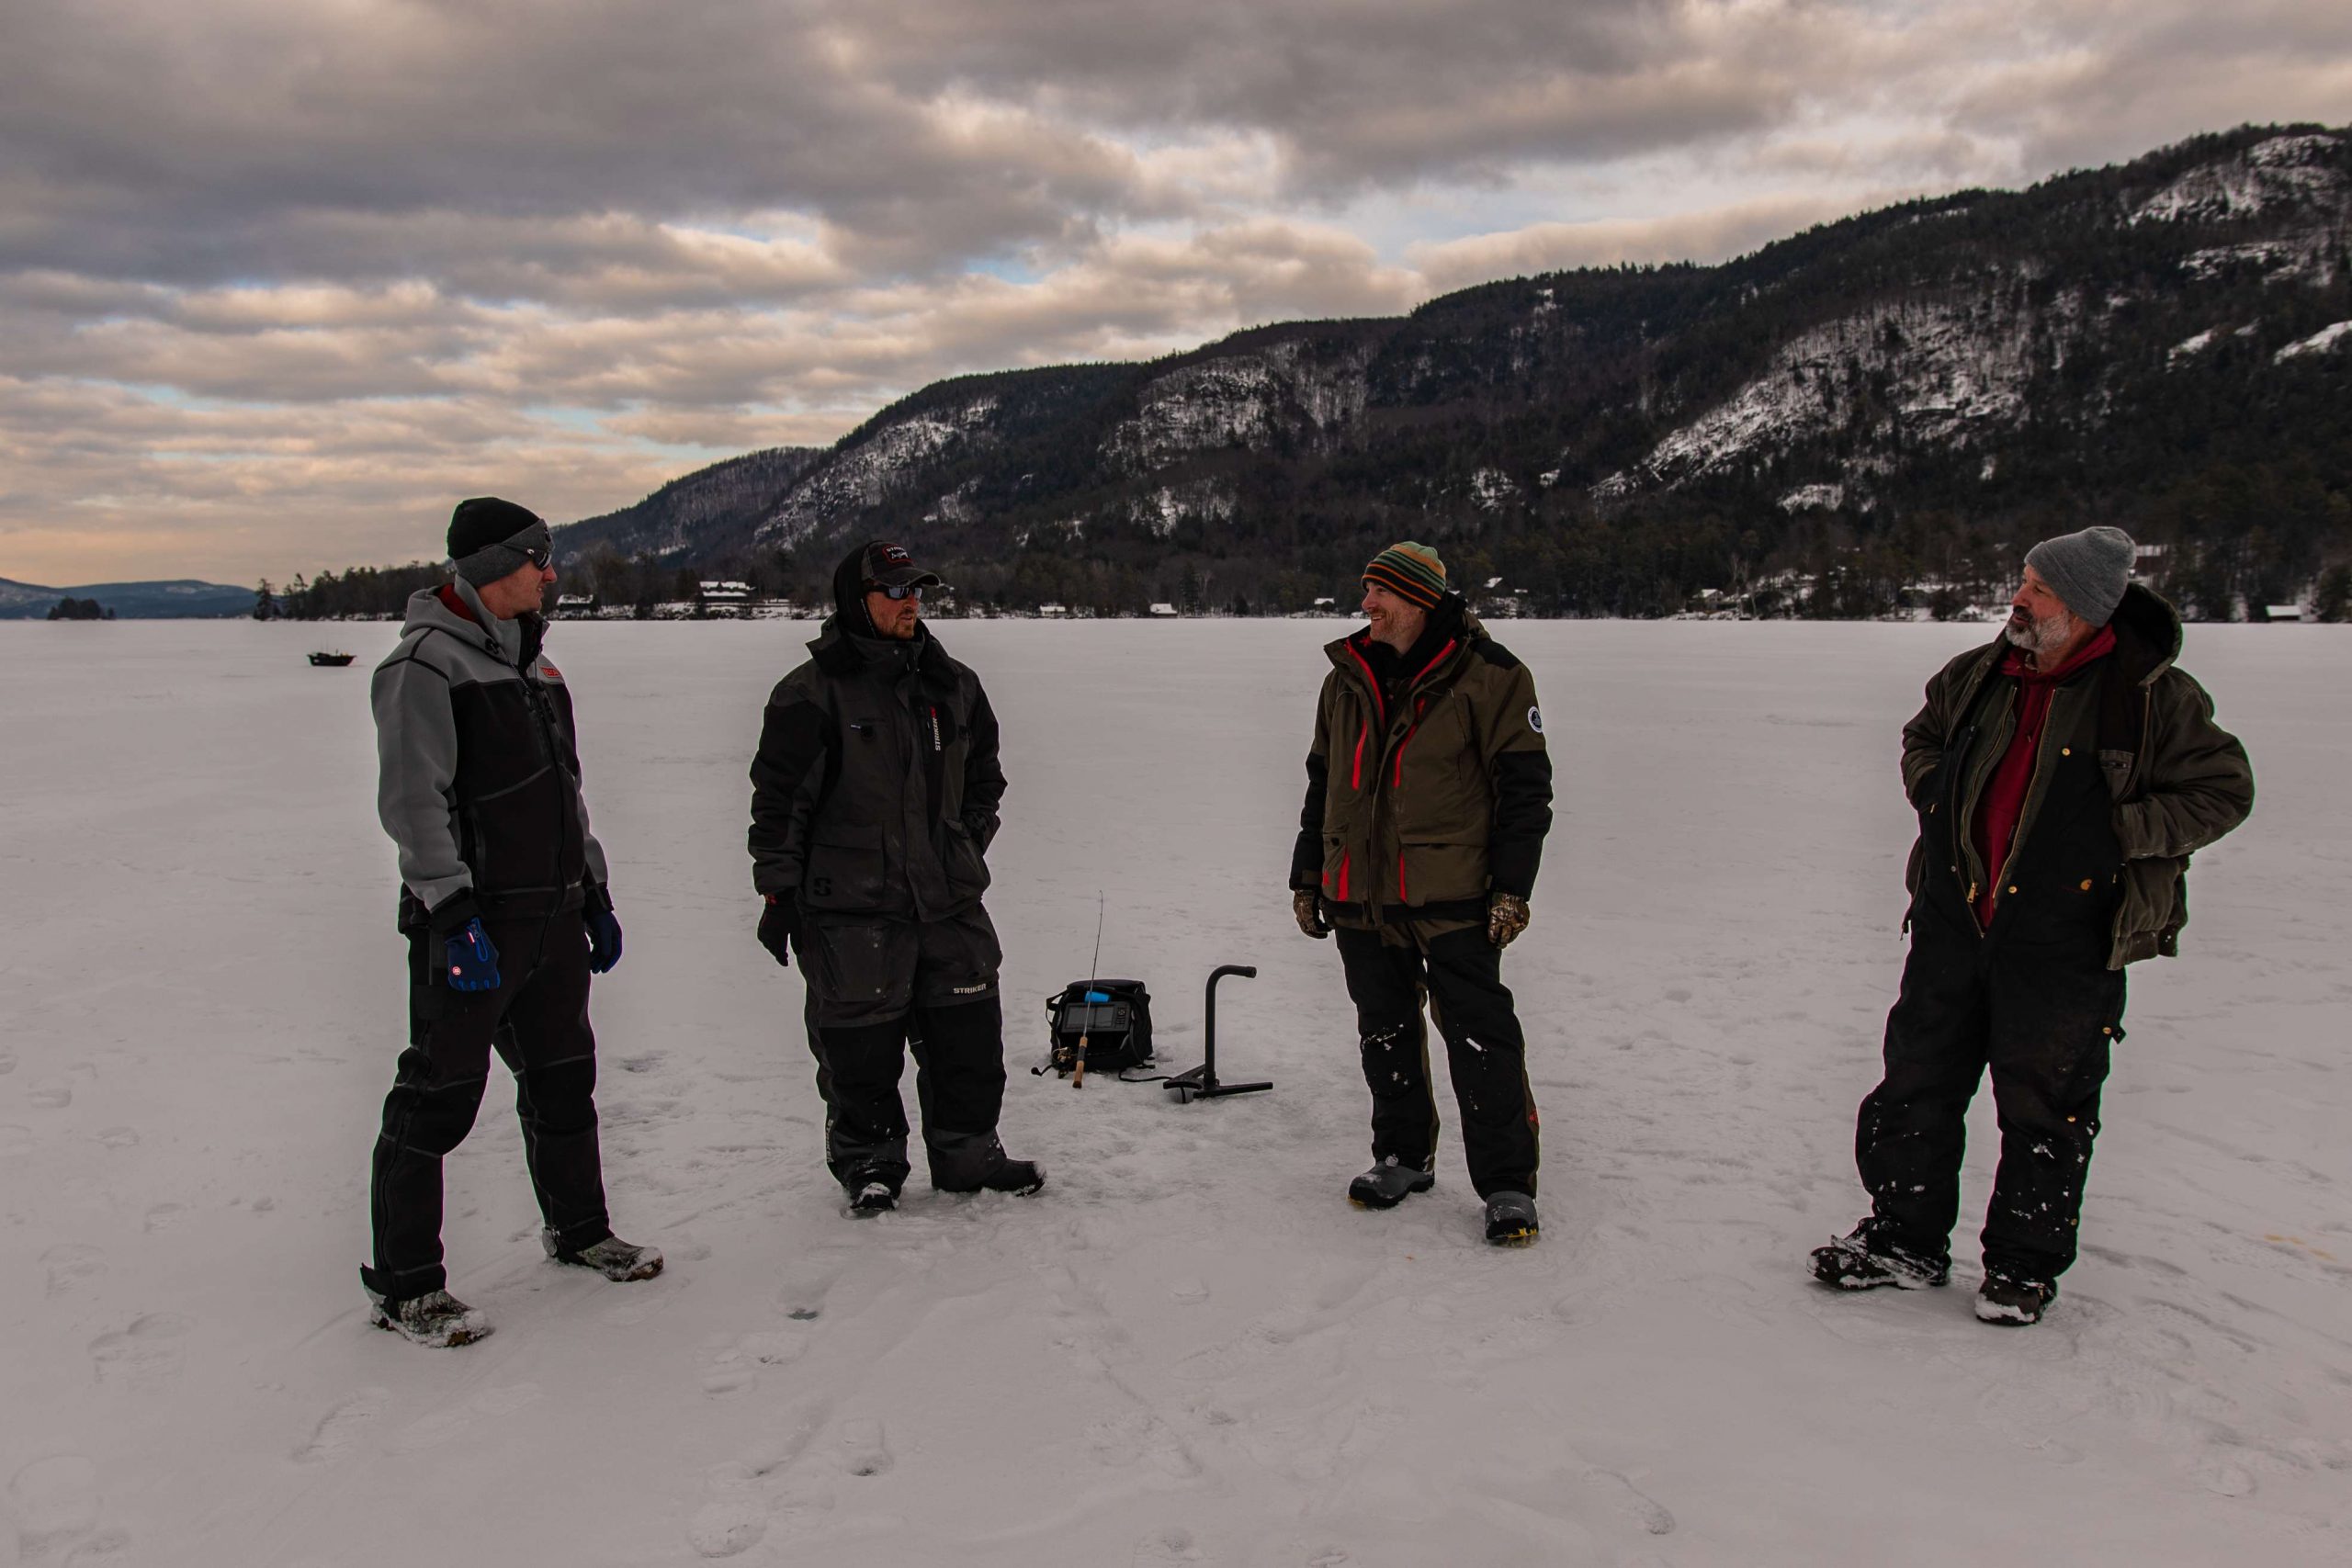 A little ice fishing talk before heading home.